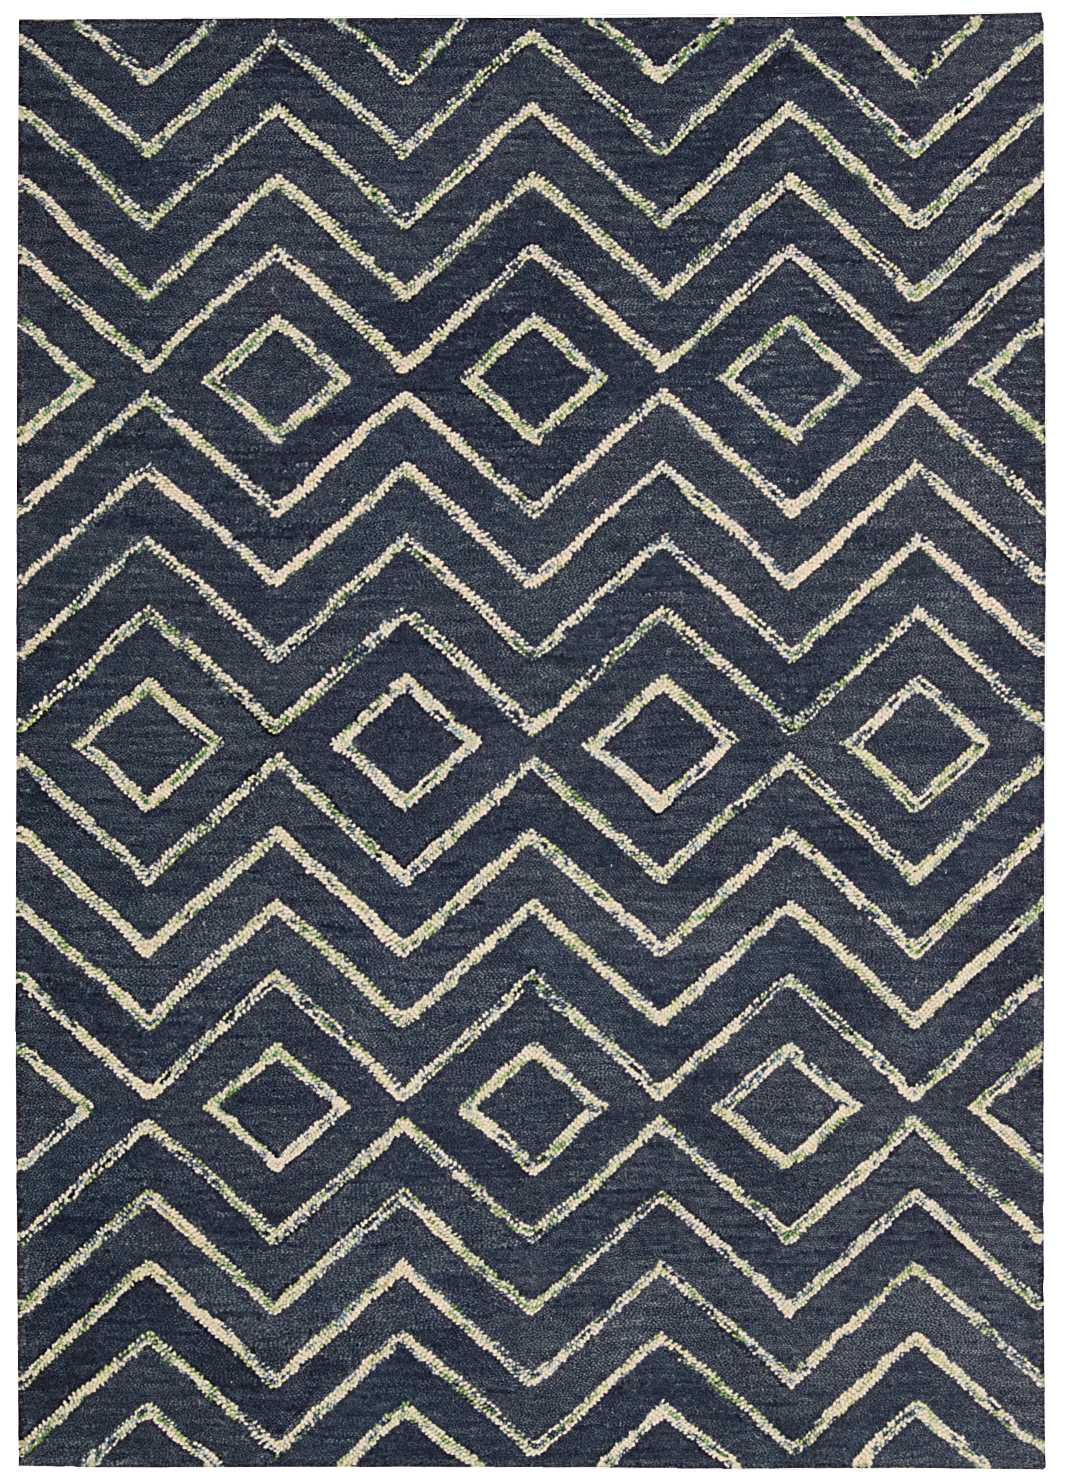 Barclay Butera Intermix Storm Area Rug by Nourison